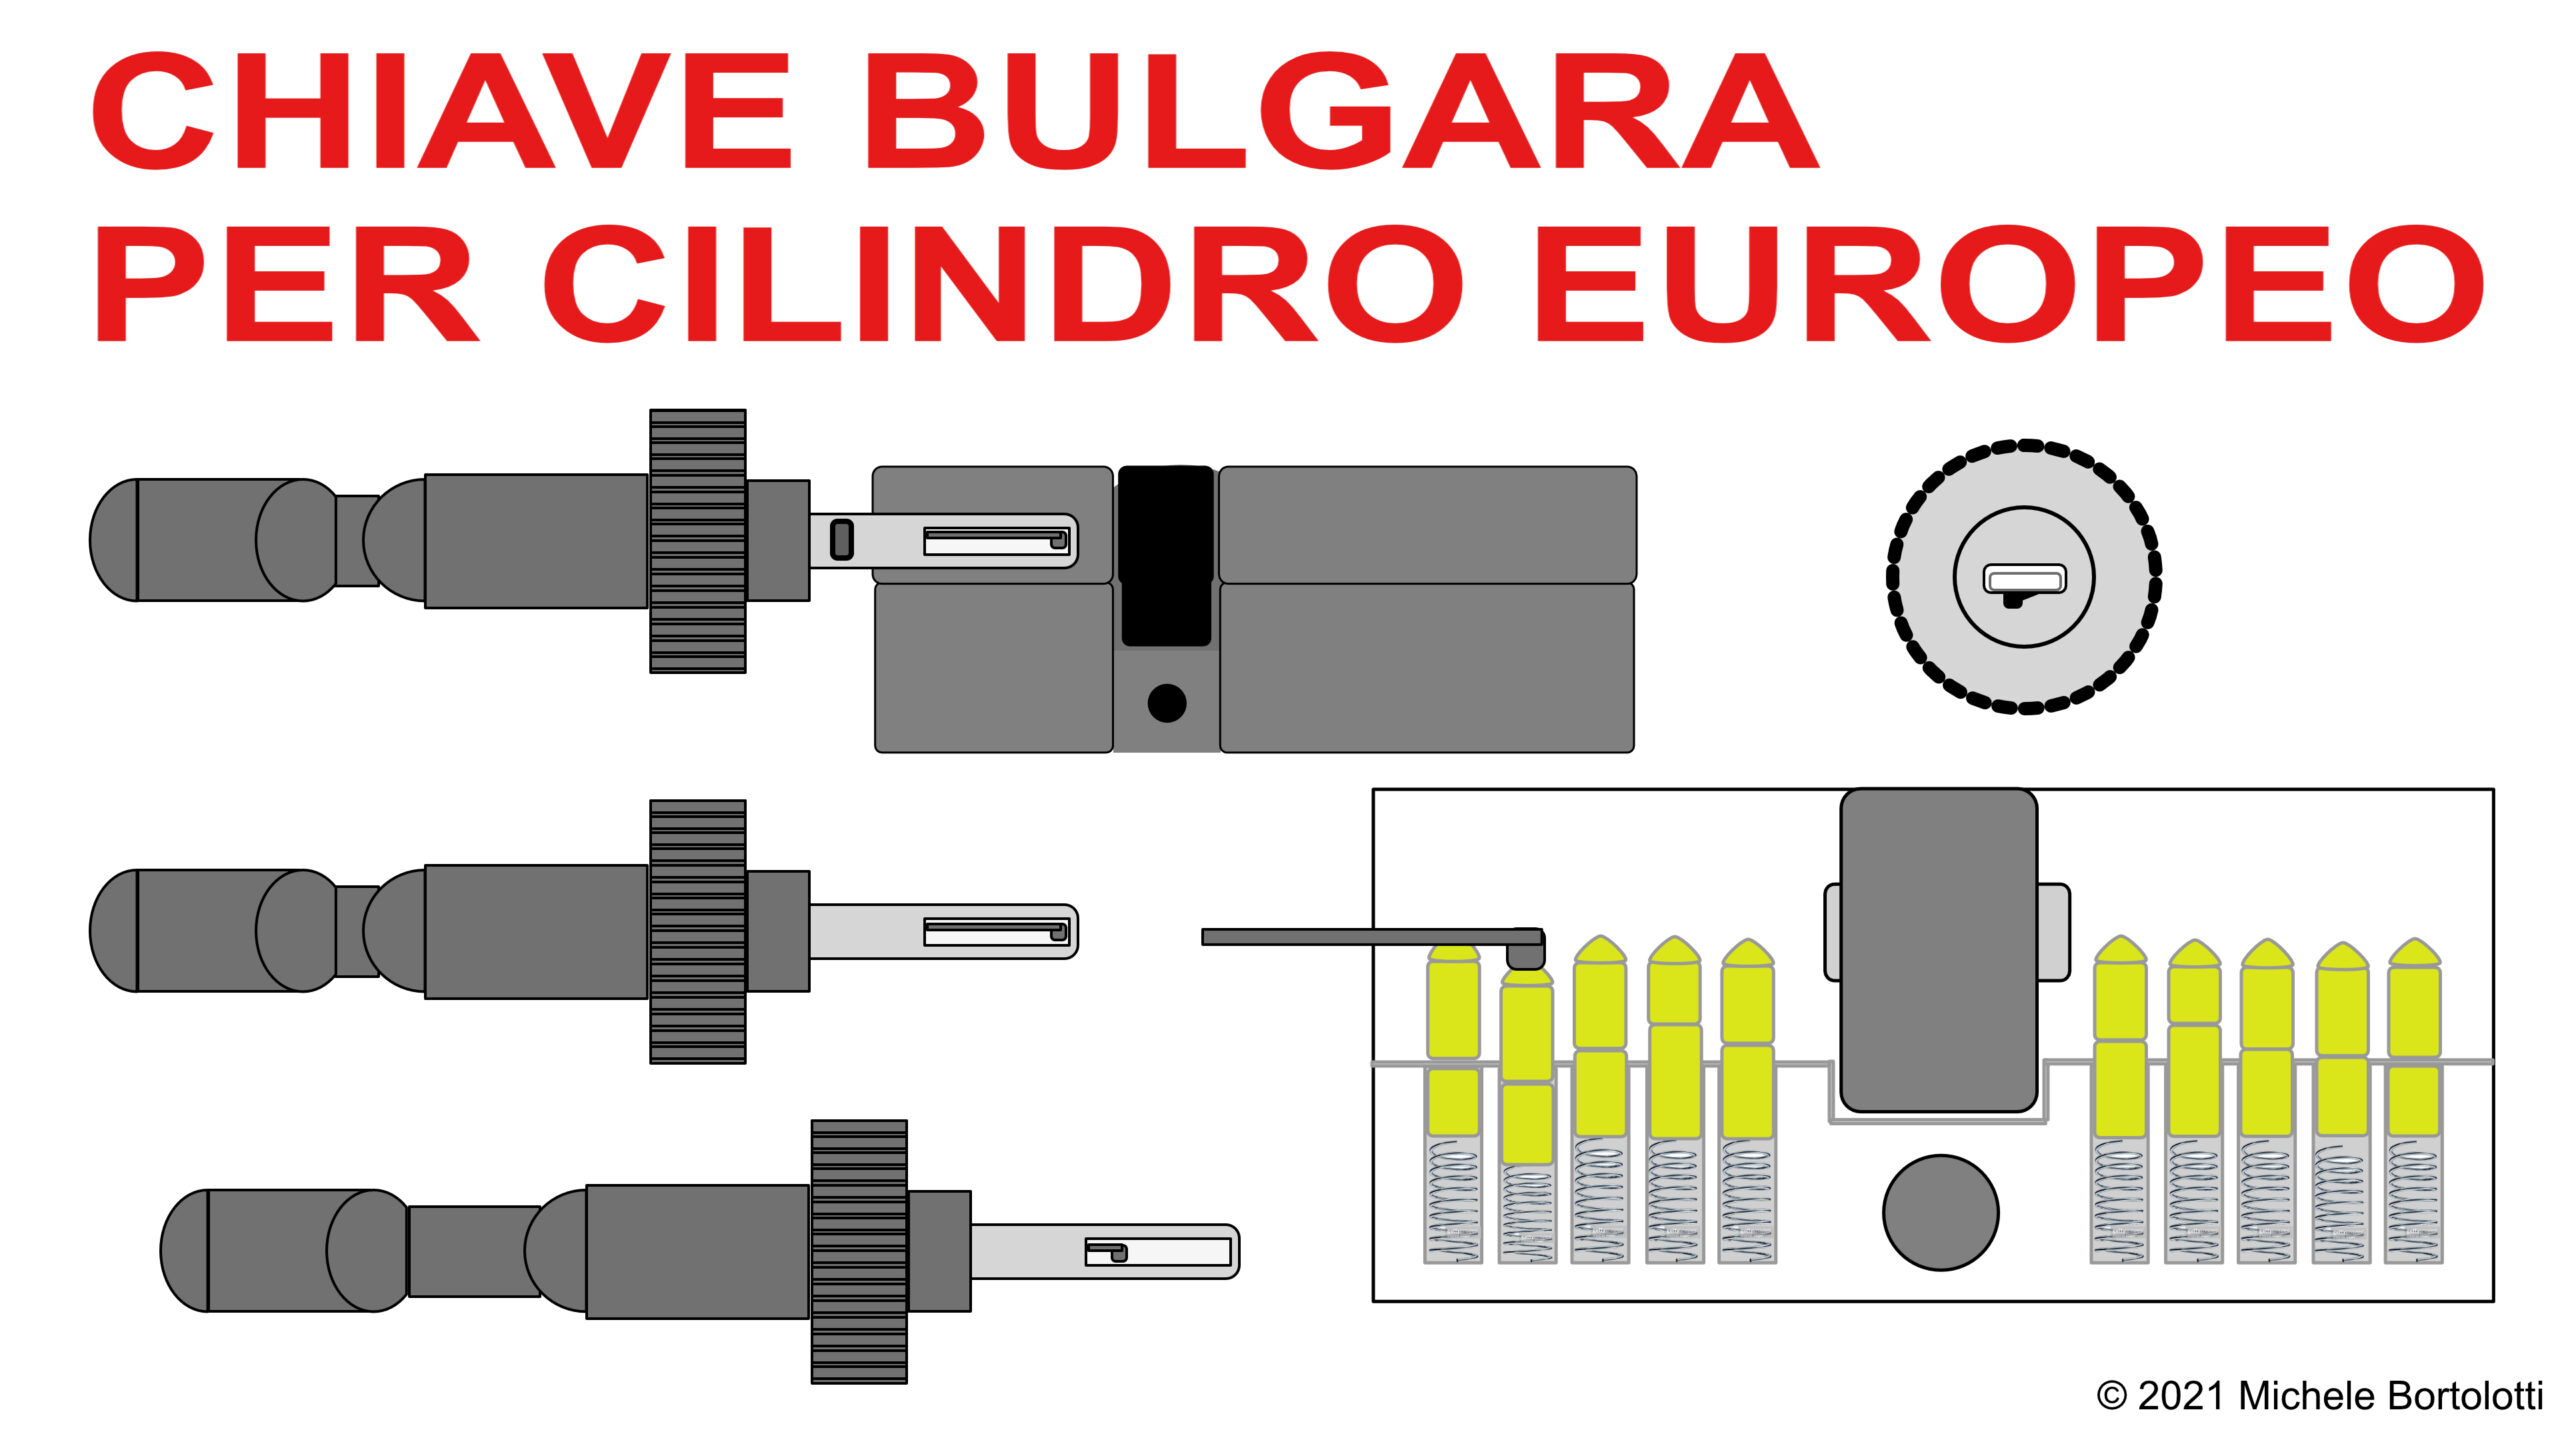 http://www.blindax.it/wp-content/uploads/2021/05/chiave-bulgara-cilindro-europeo-scaled.jpg